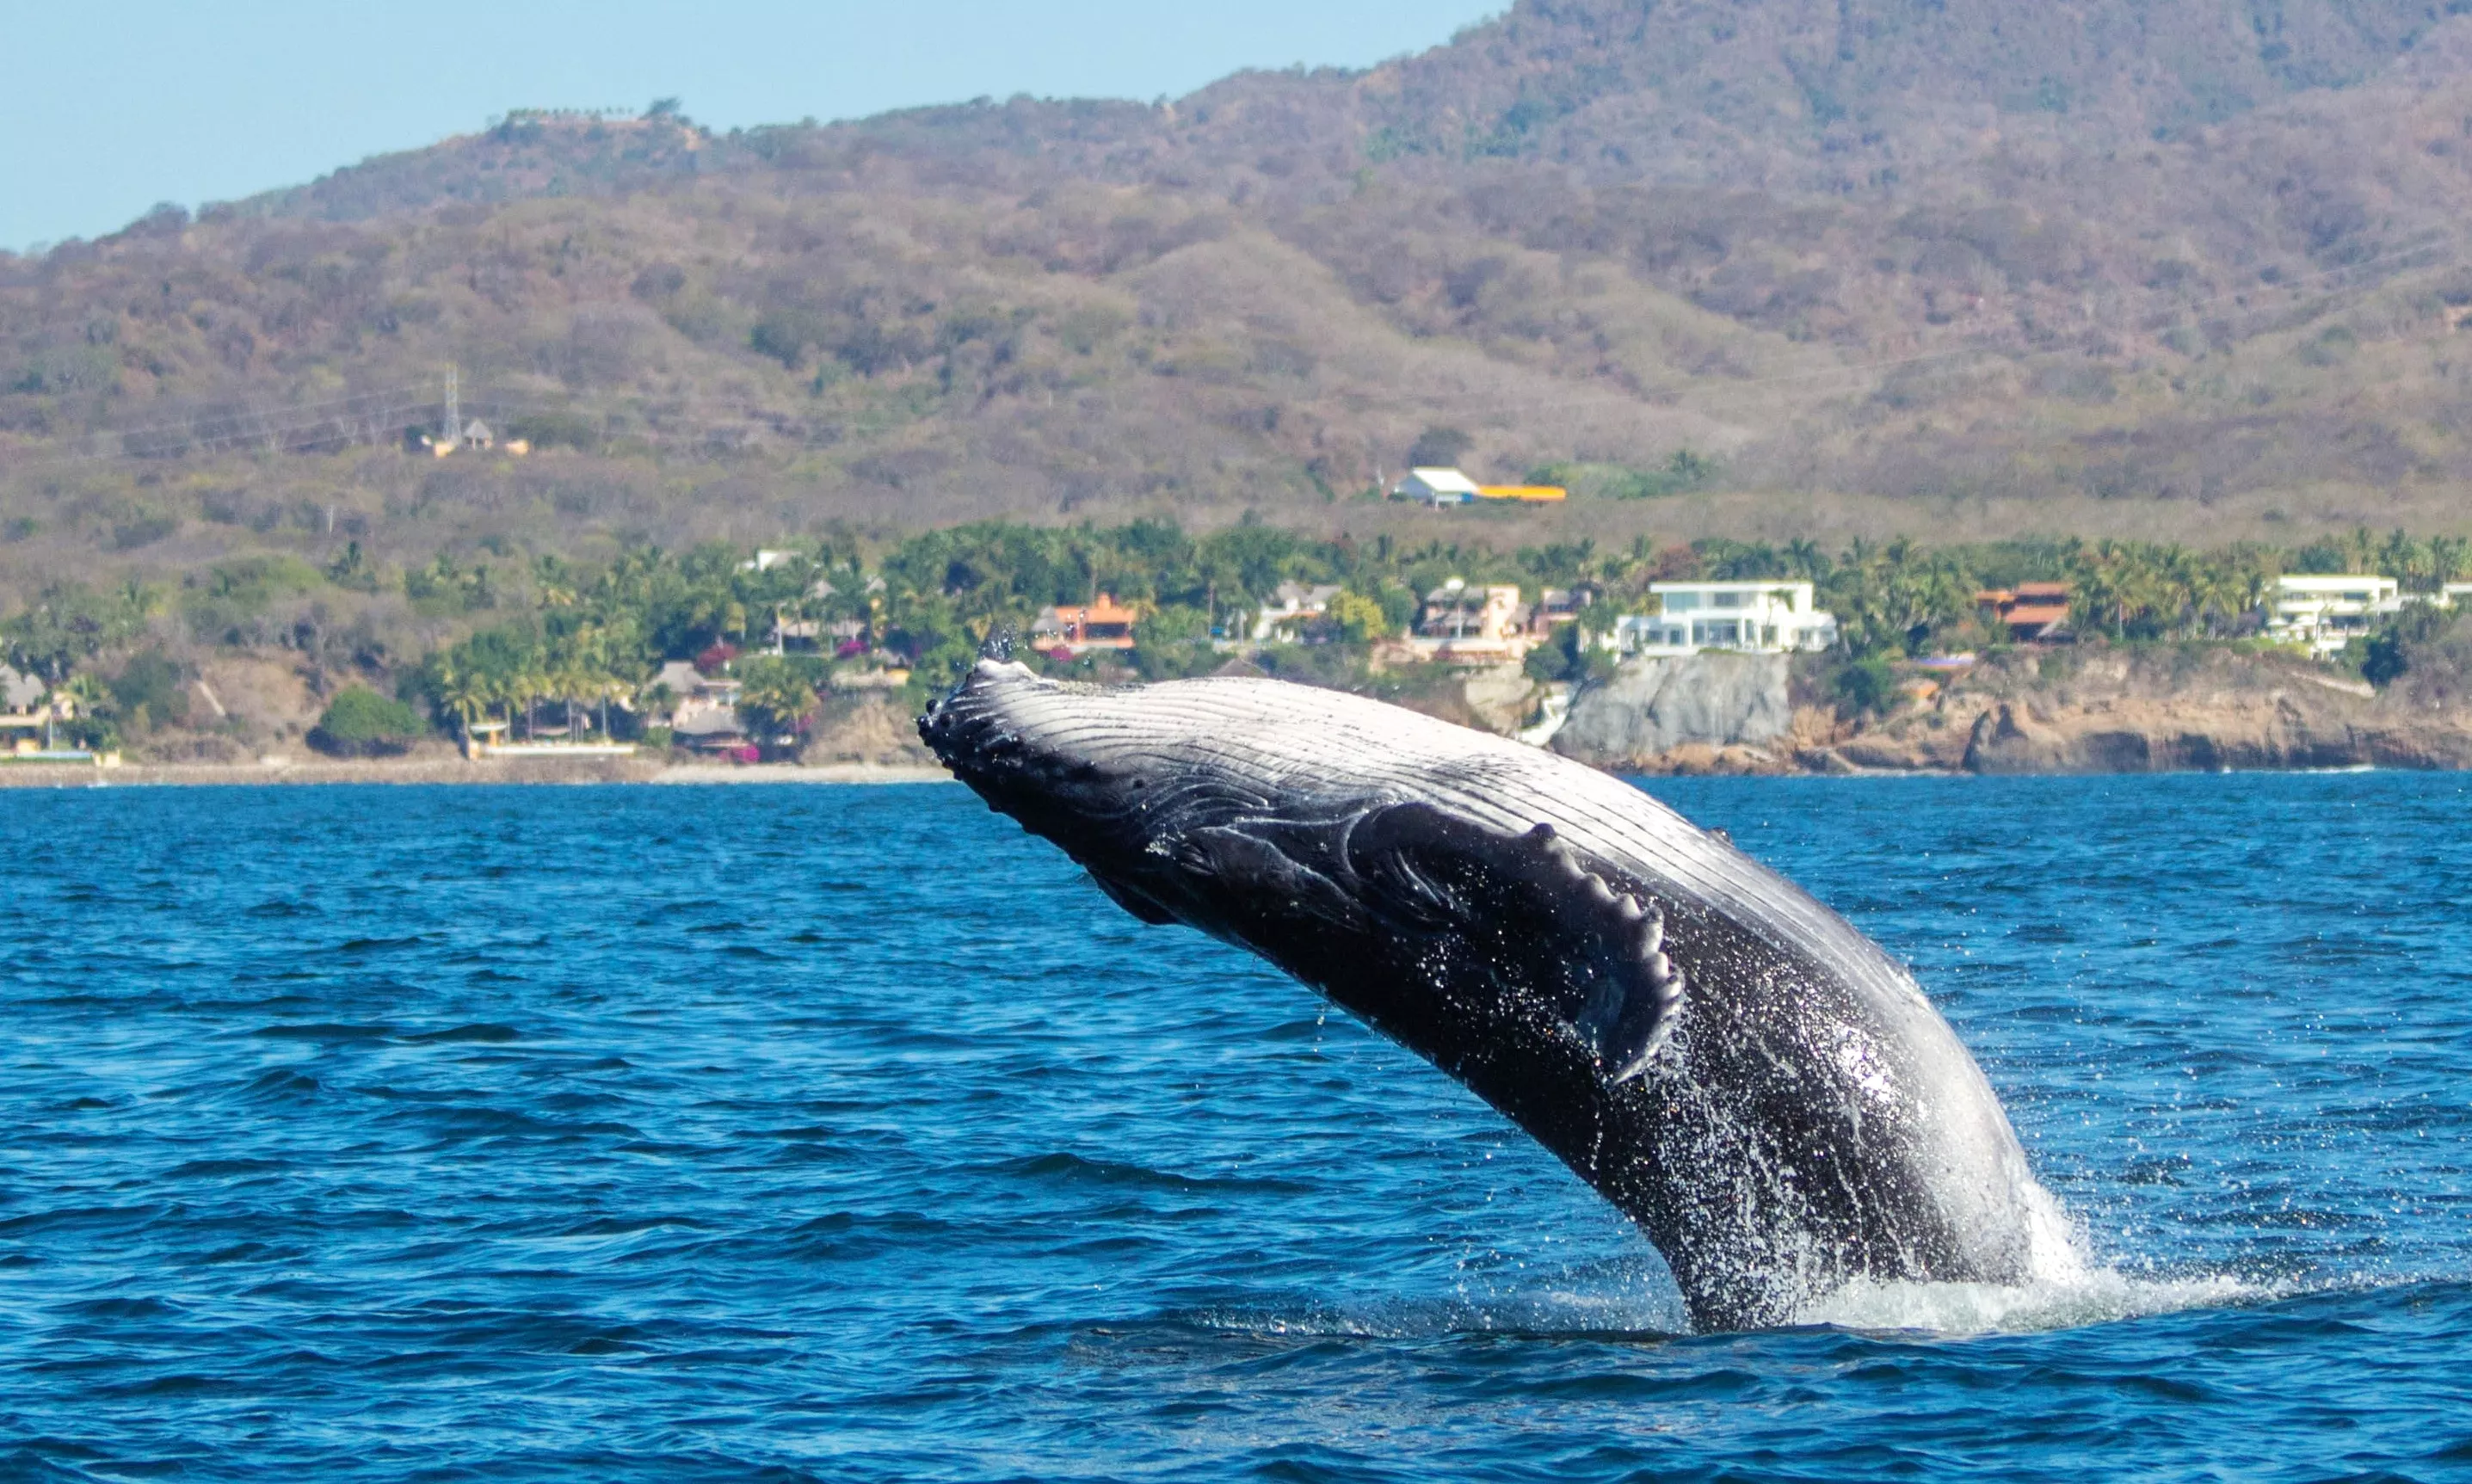 Ocean Friendly Whale Watching Tours in Mexico, North America | Excursions - Rated 4.1